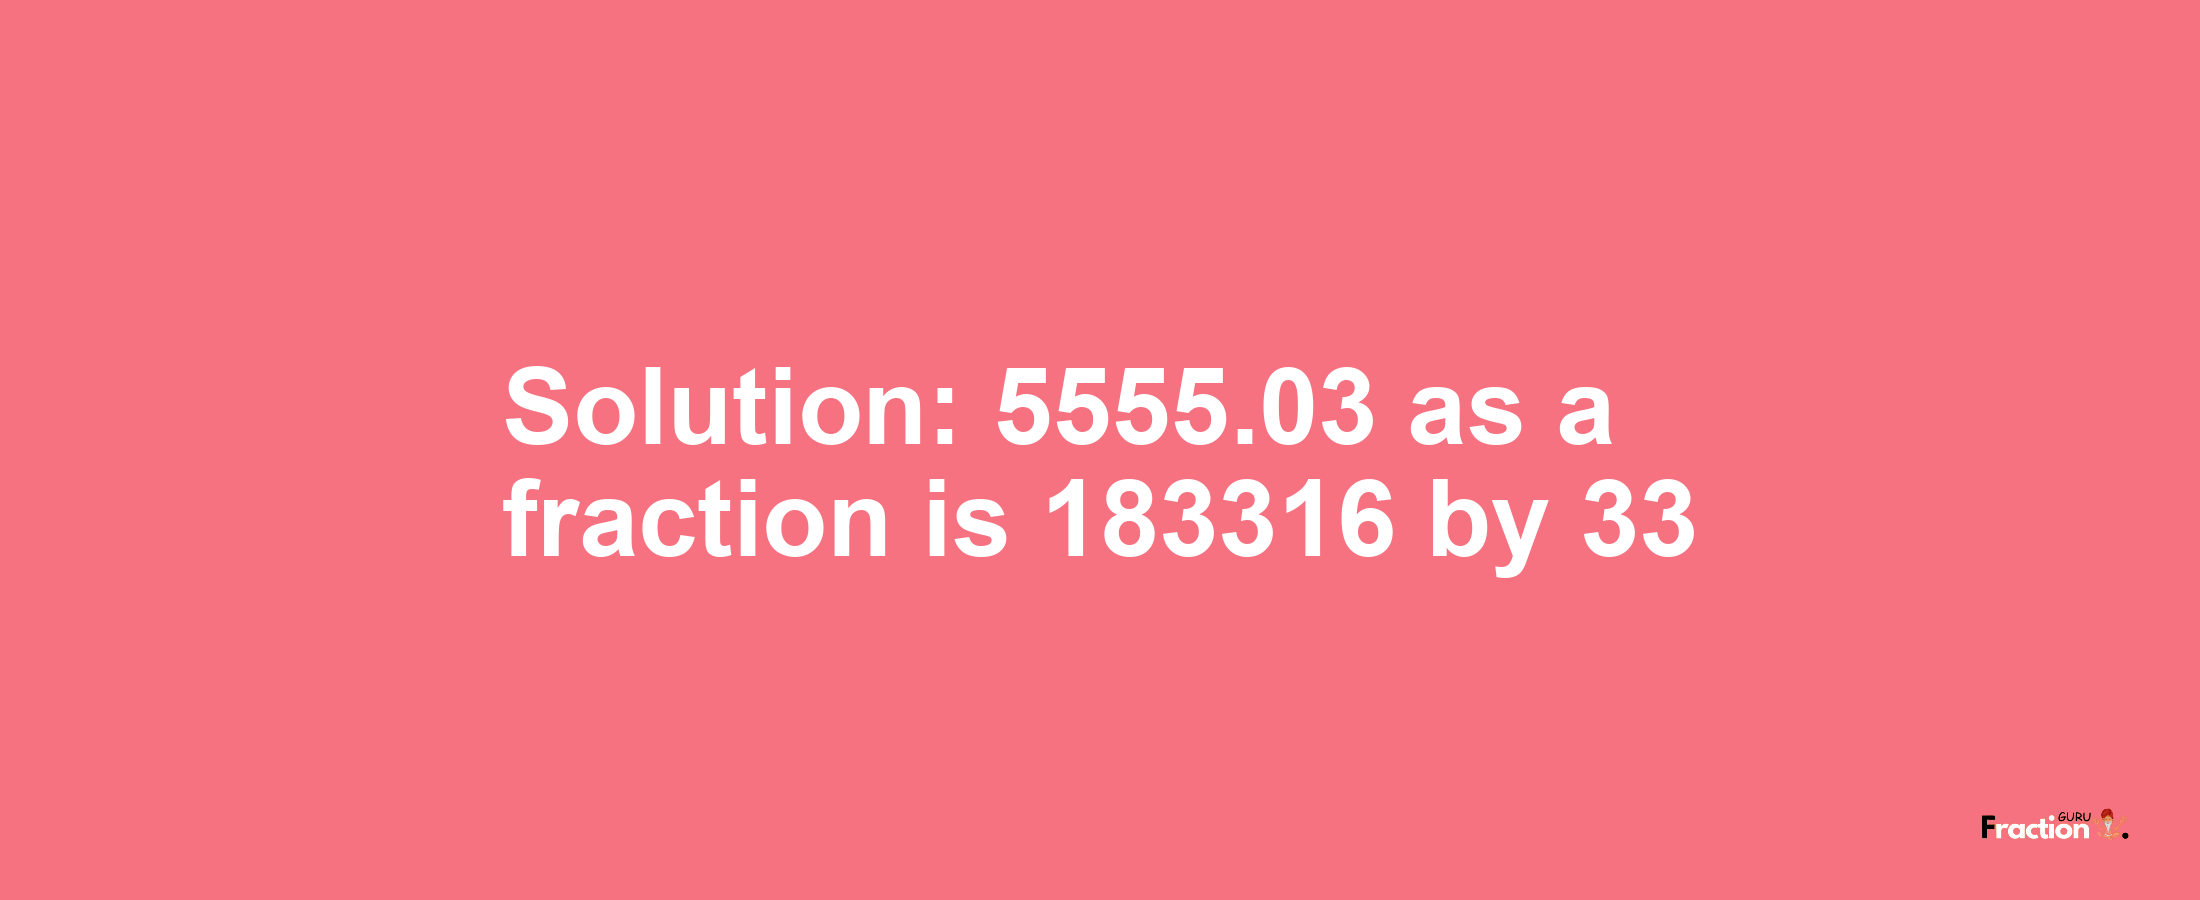 Solution:5555.03 as a fraction is 183316/33